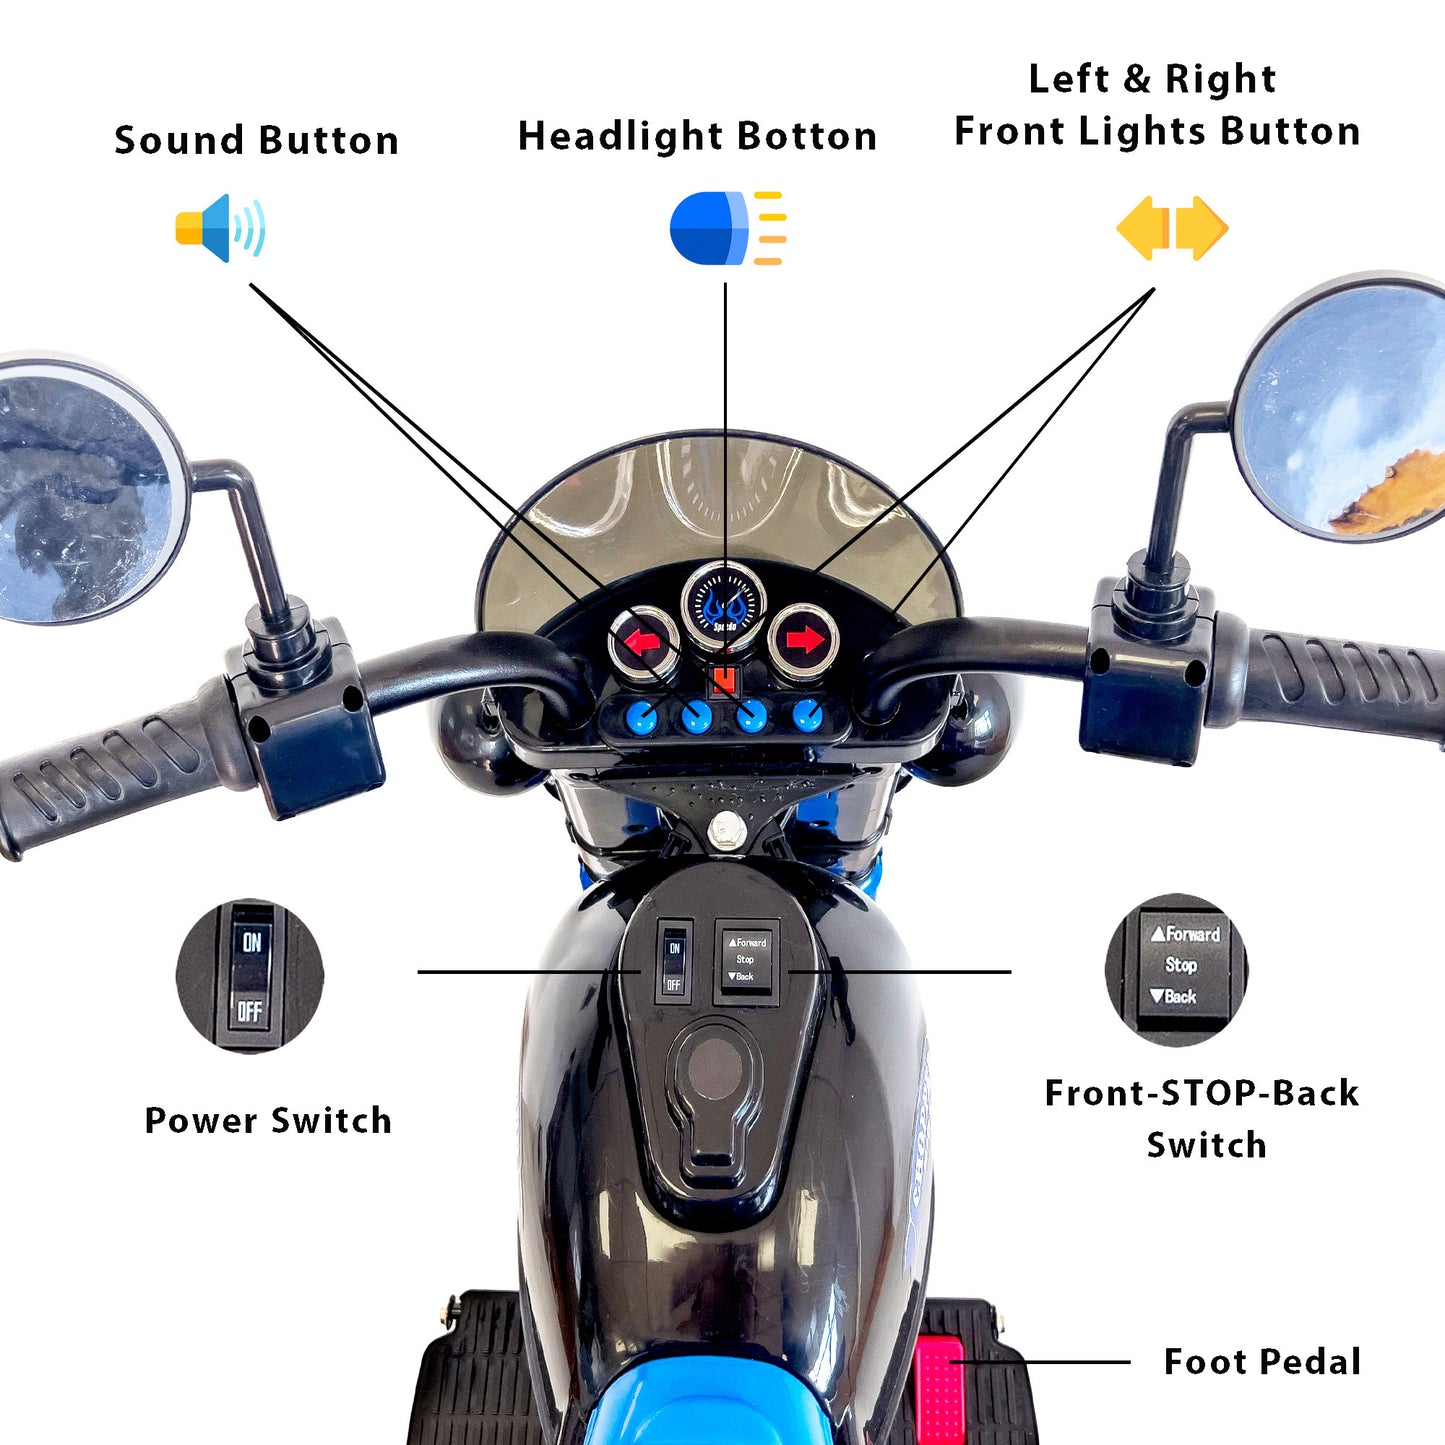 Kids Ride On Motorcycle Toy, 3-Wheel Chopper Motorbike with LED Colorful Headlights, Blue Riding on Electric Battery Powered Harley Motorcycle for Boys Girls